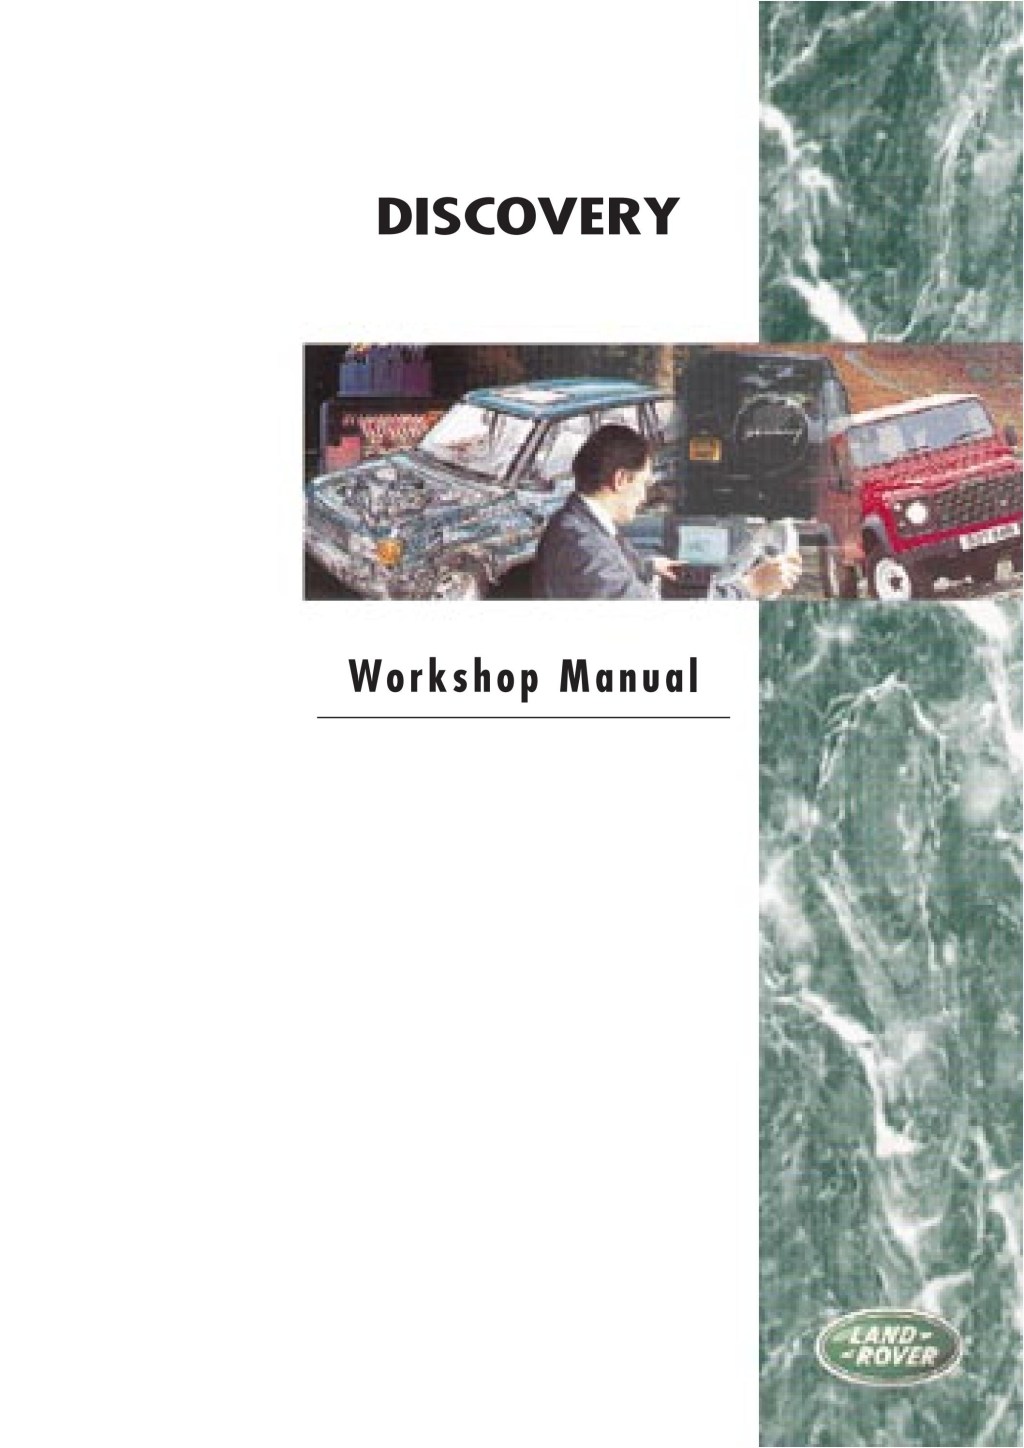 Picture of: Land Rover Discovery  Service Repair Manual by kmdisiodok